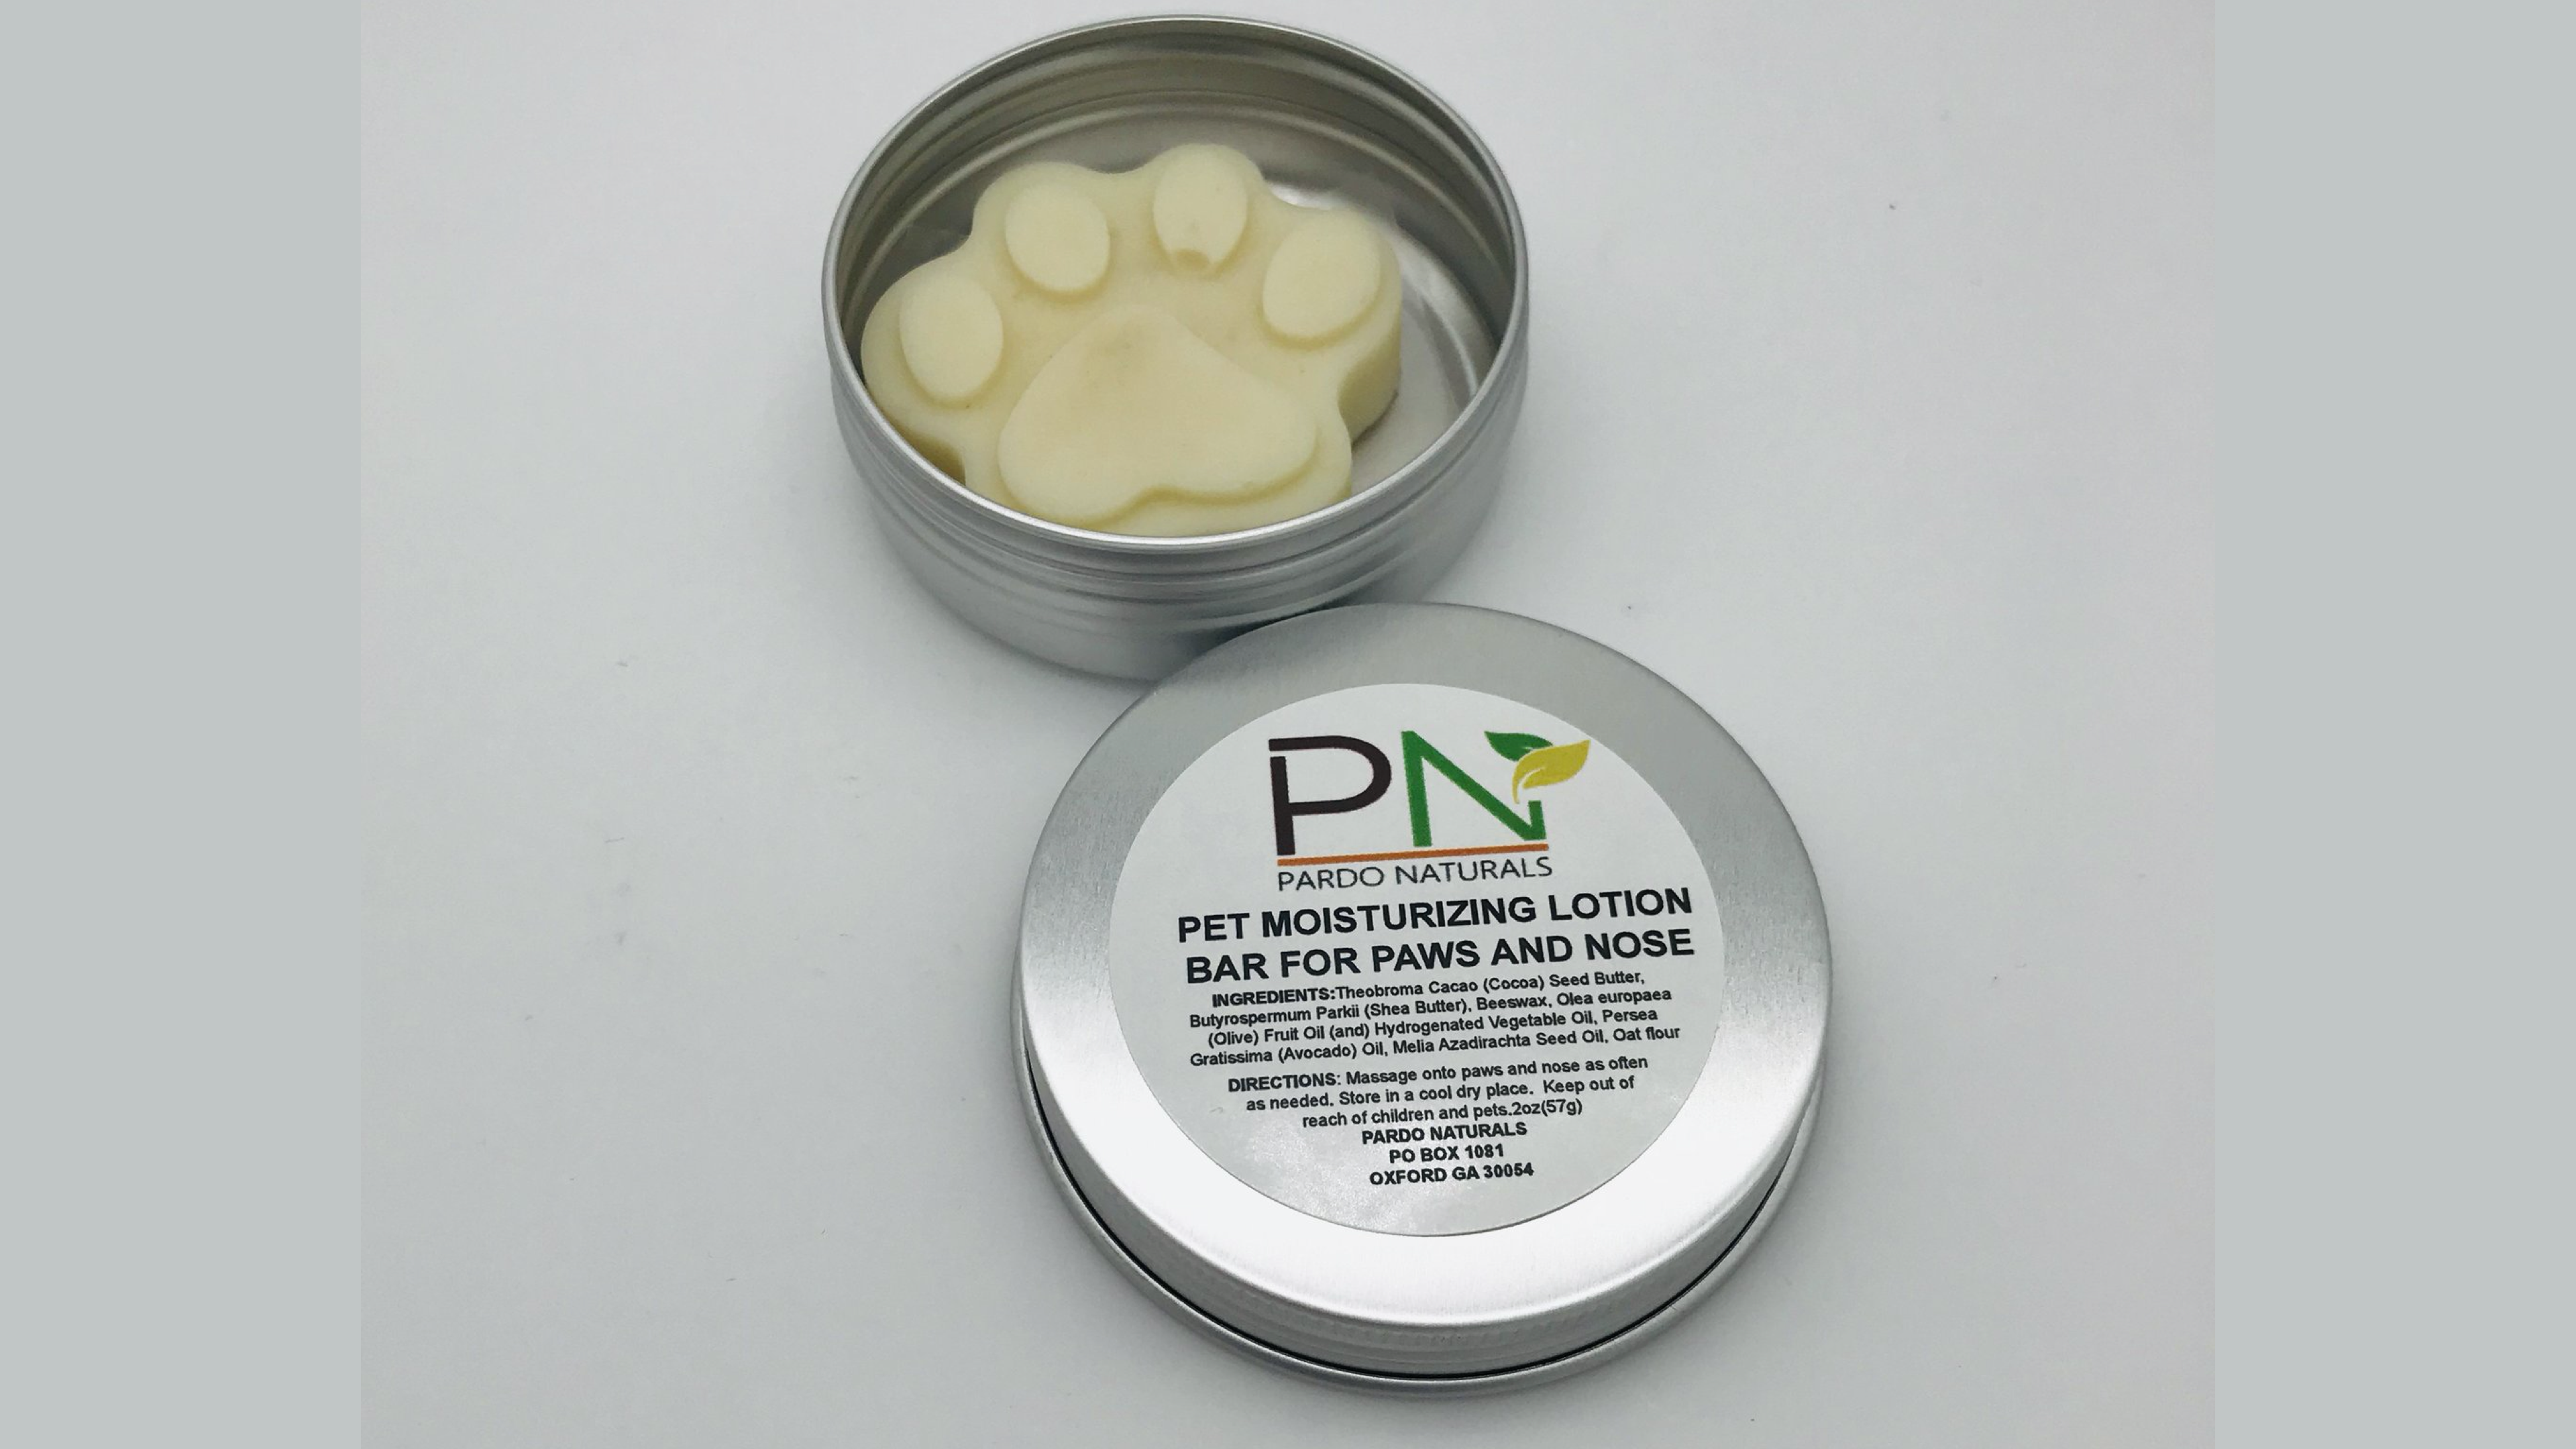 moisturizing balm for your pet's nose and paws